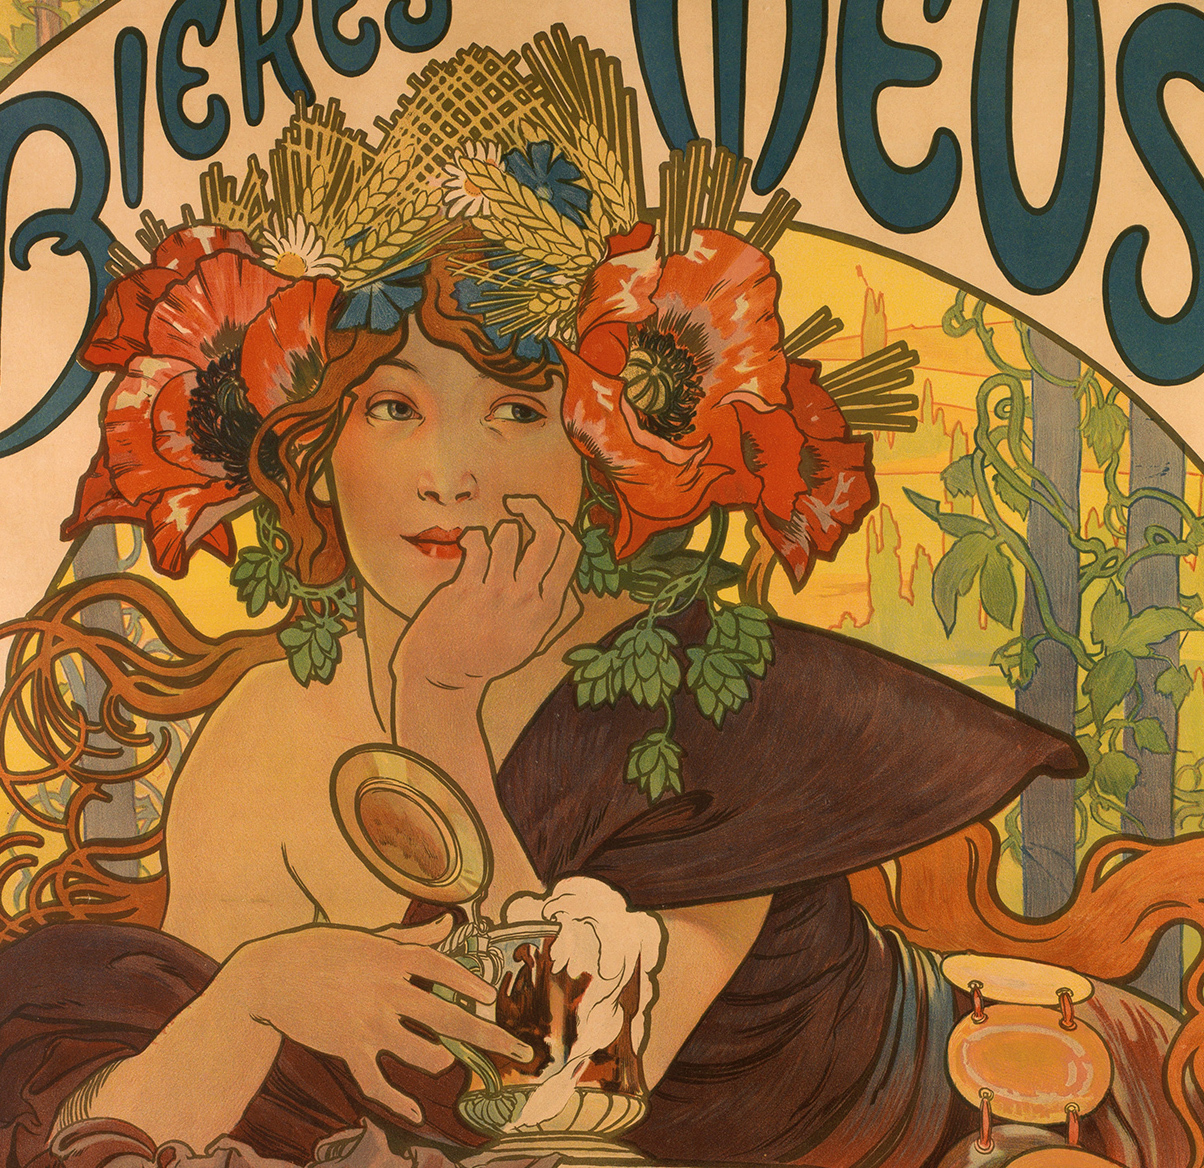 A cropped poster of a person wearing a big red floral headpiece and holding a cup with white foam.